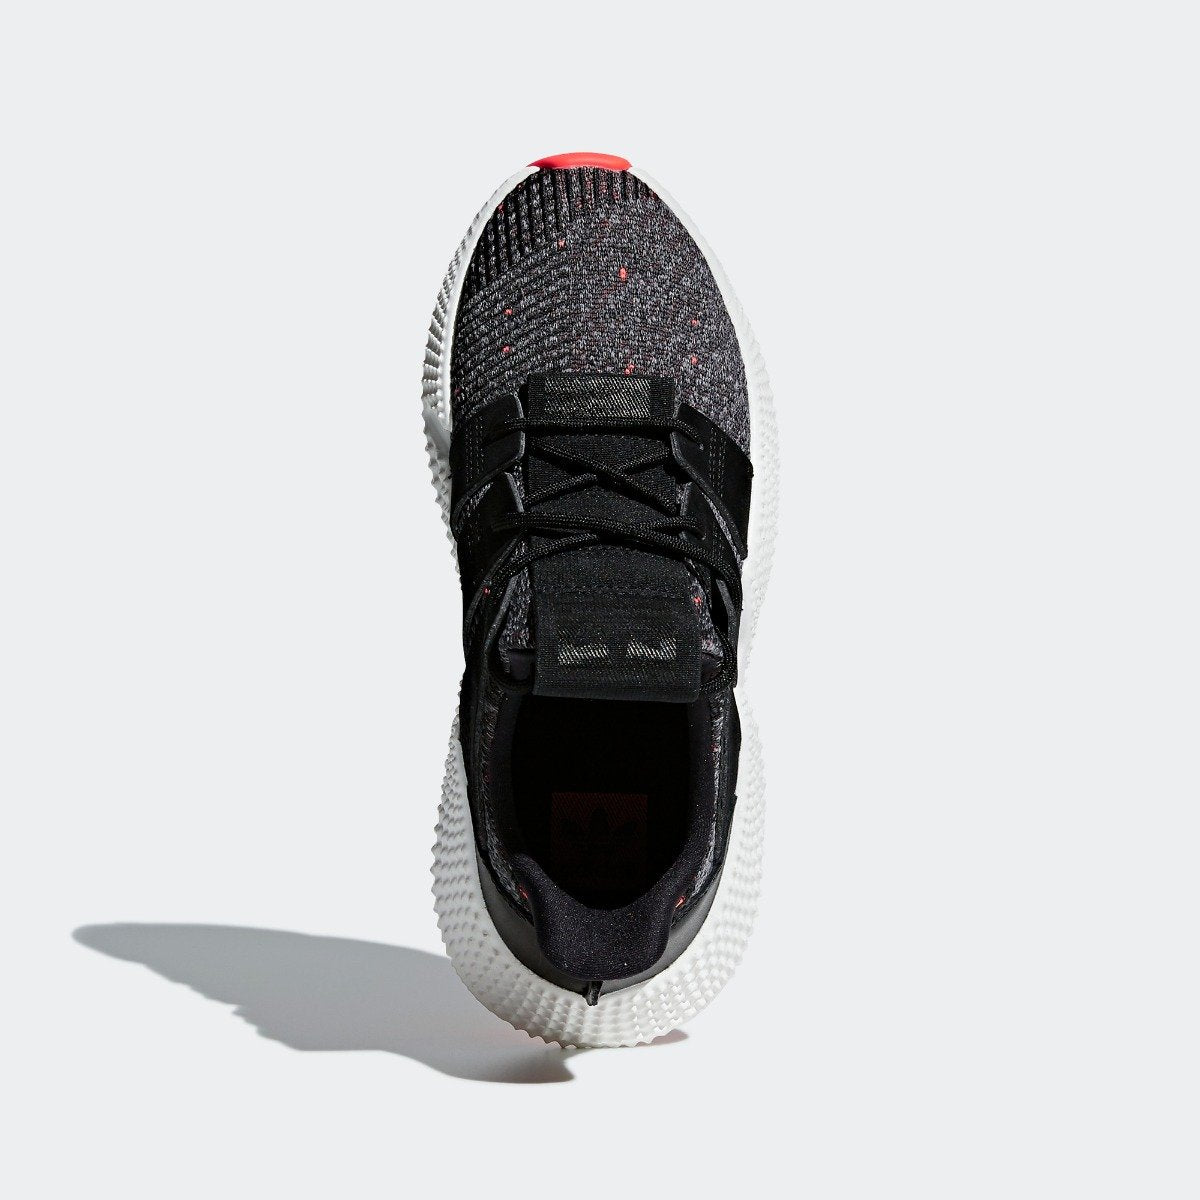 adidas prophere shoes women's